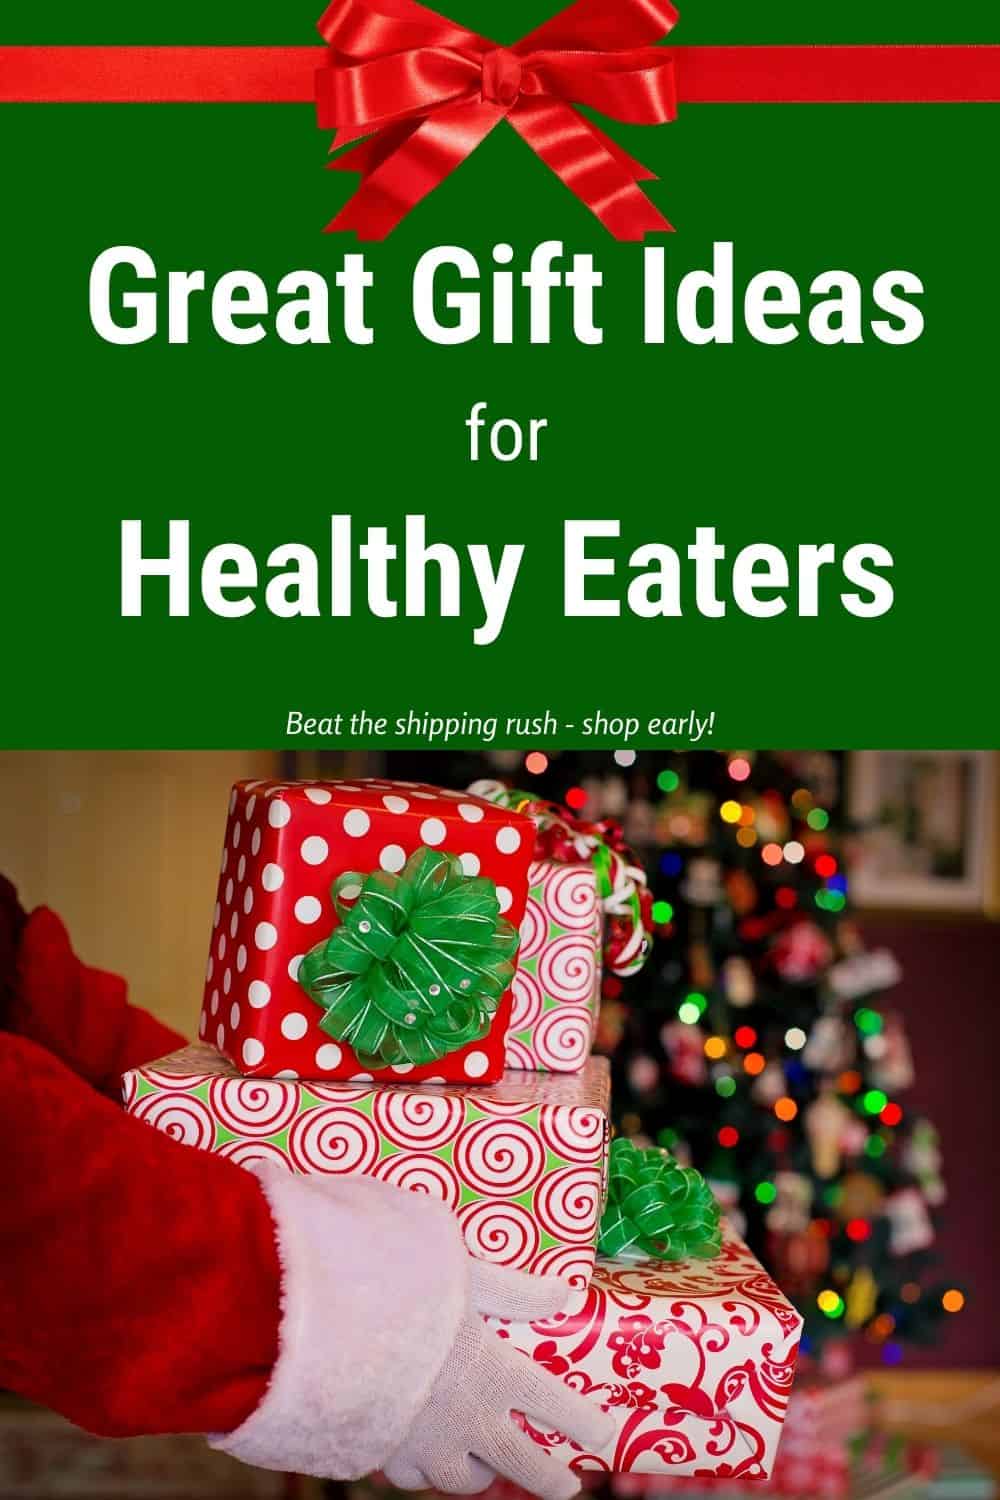 Great Gift Ideas for Healthy Eaters